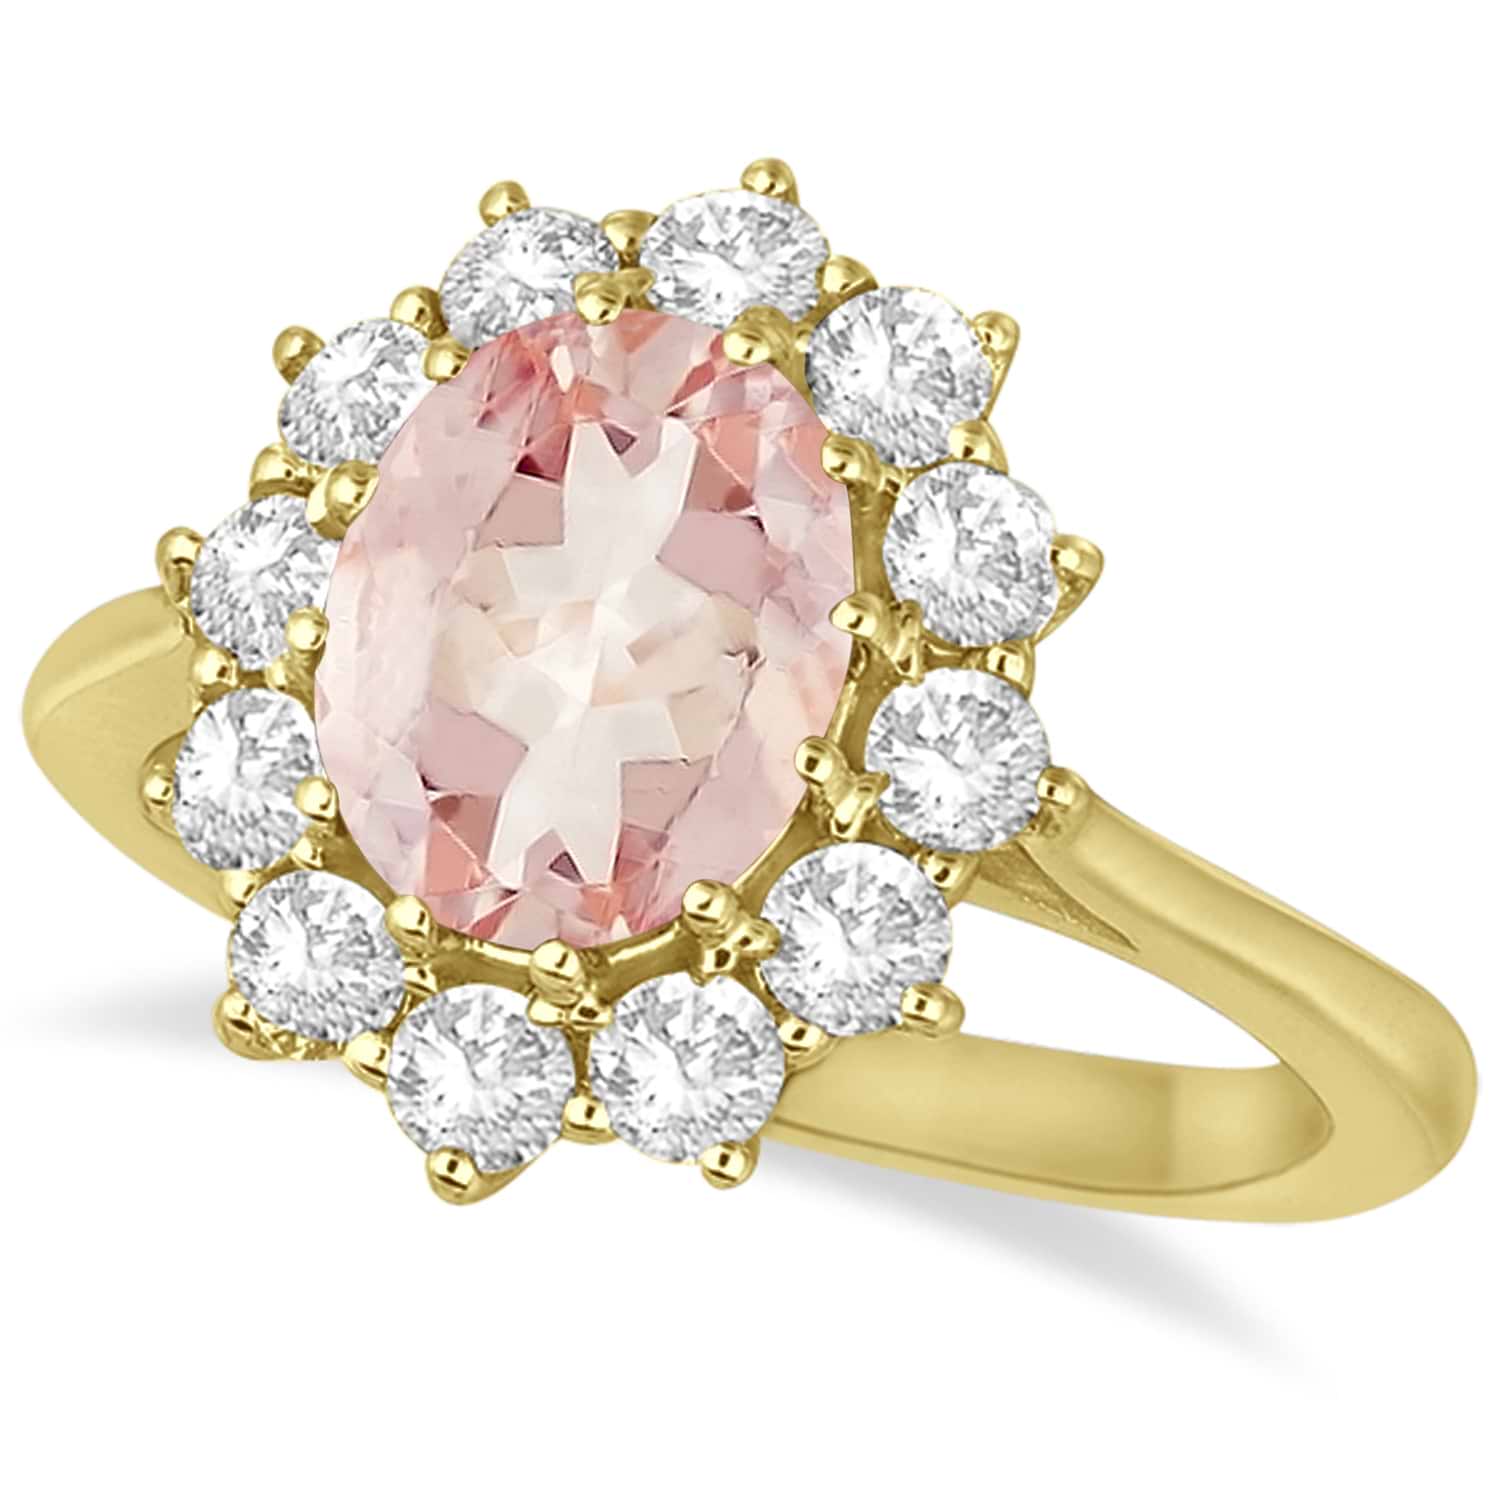 Oval Morganite and Diamond Ring 14k Yellow Gold (3.60ctw)